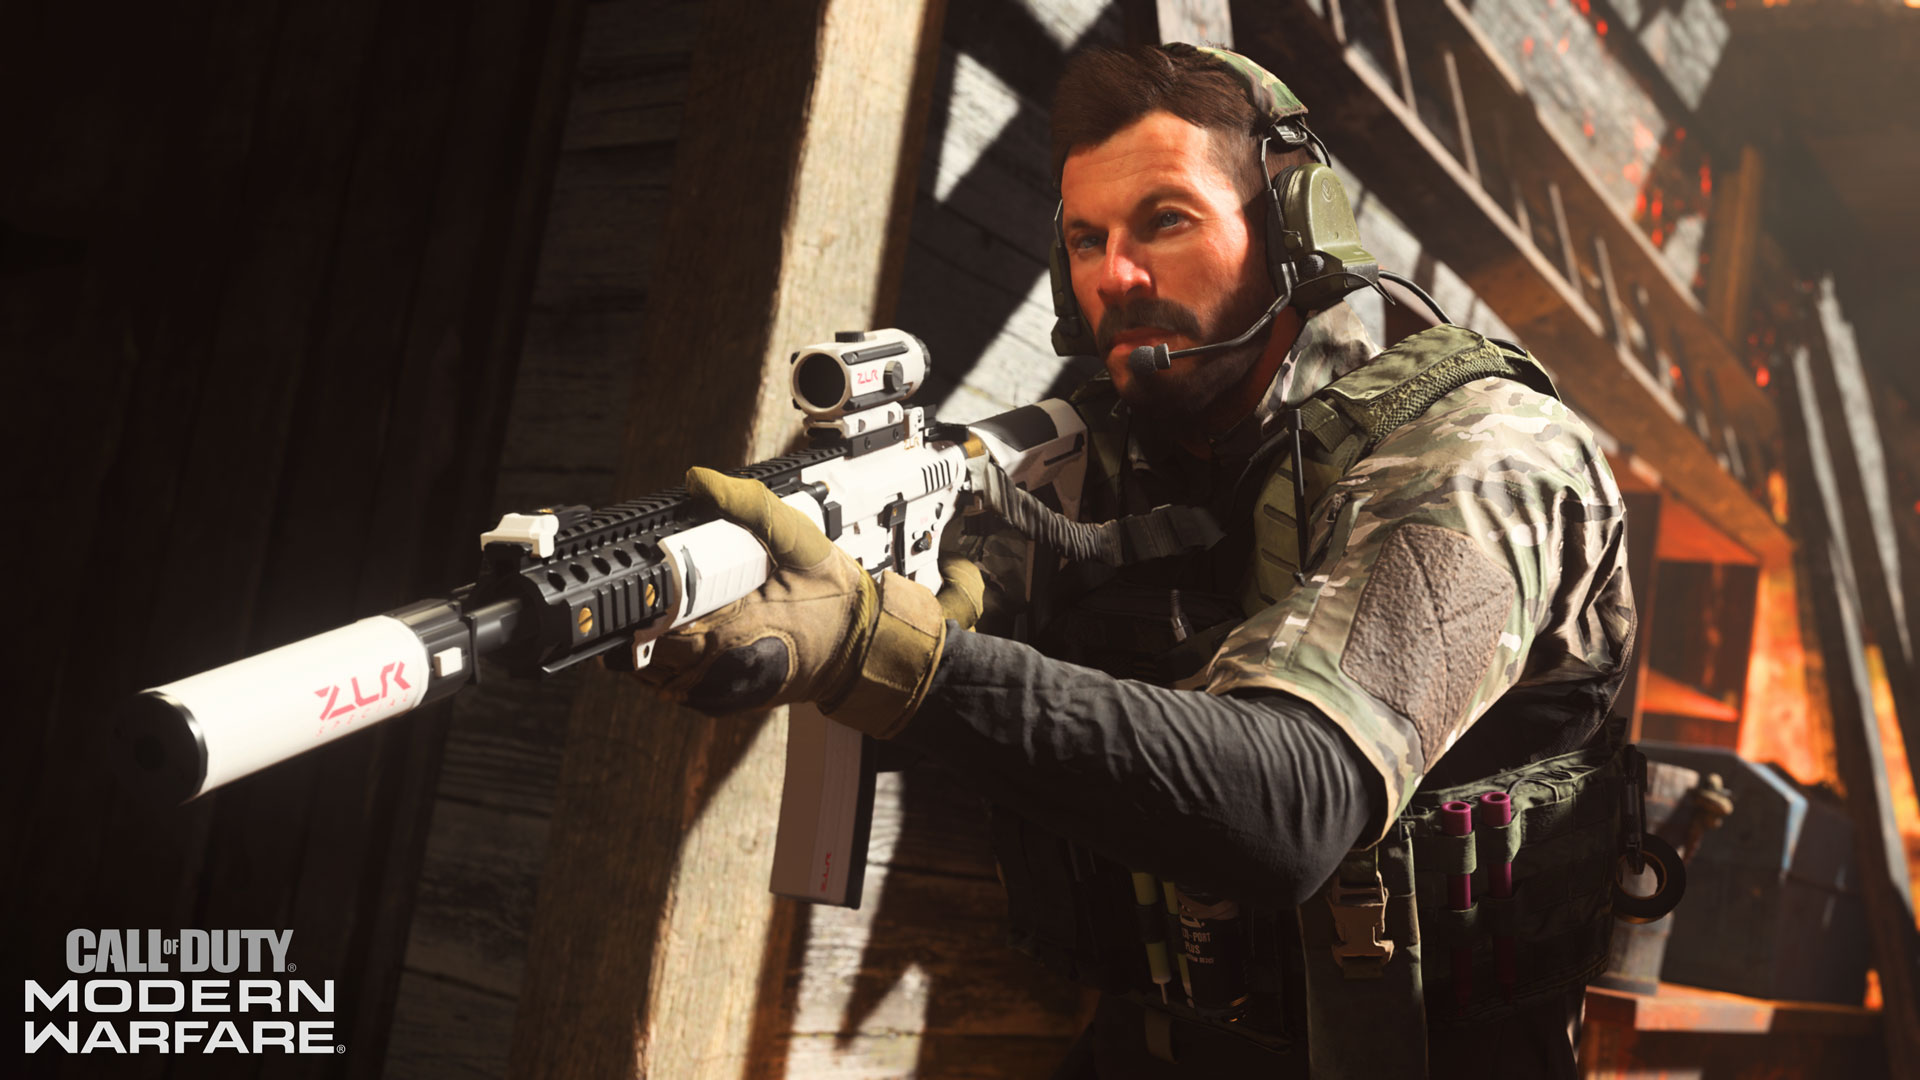 Alex Reinforces the Coalition Operators of Call of Duty: Modern Warfare